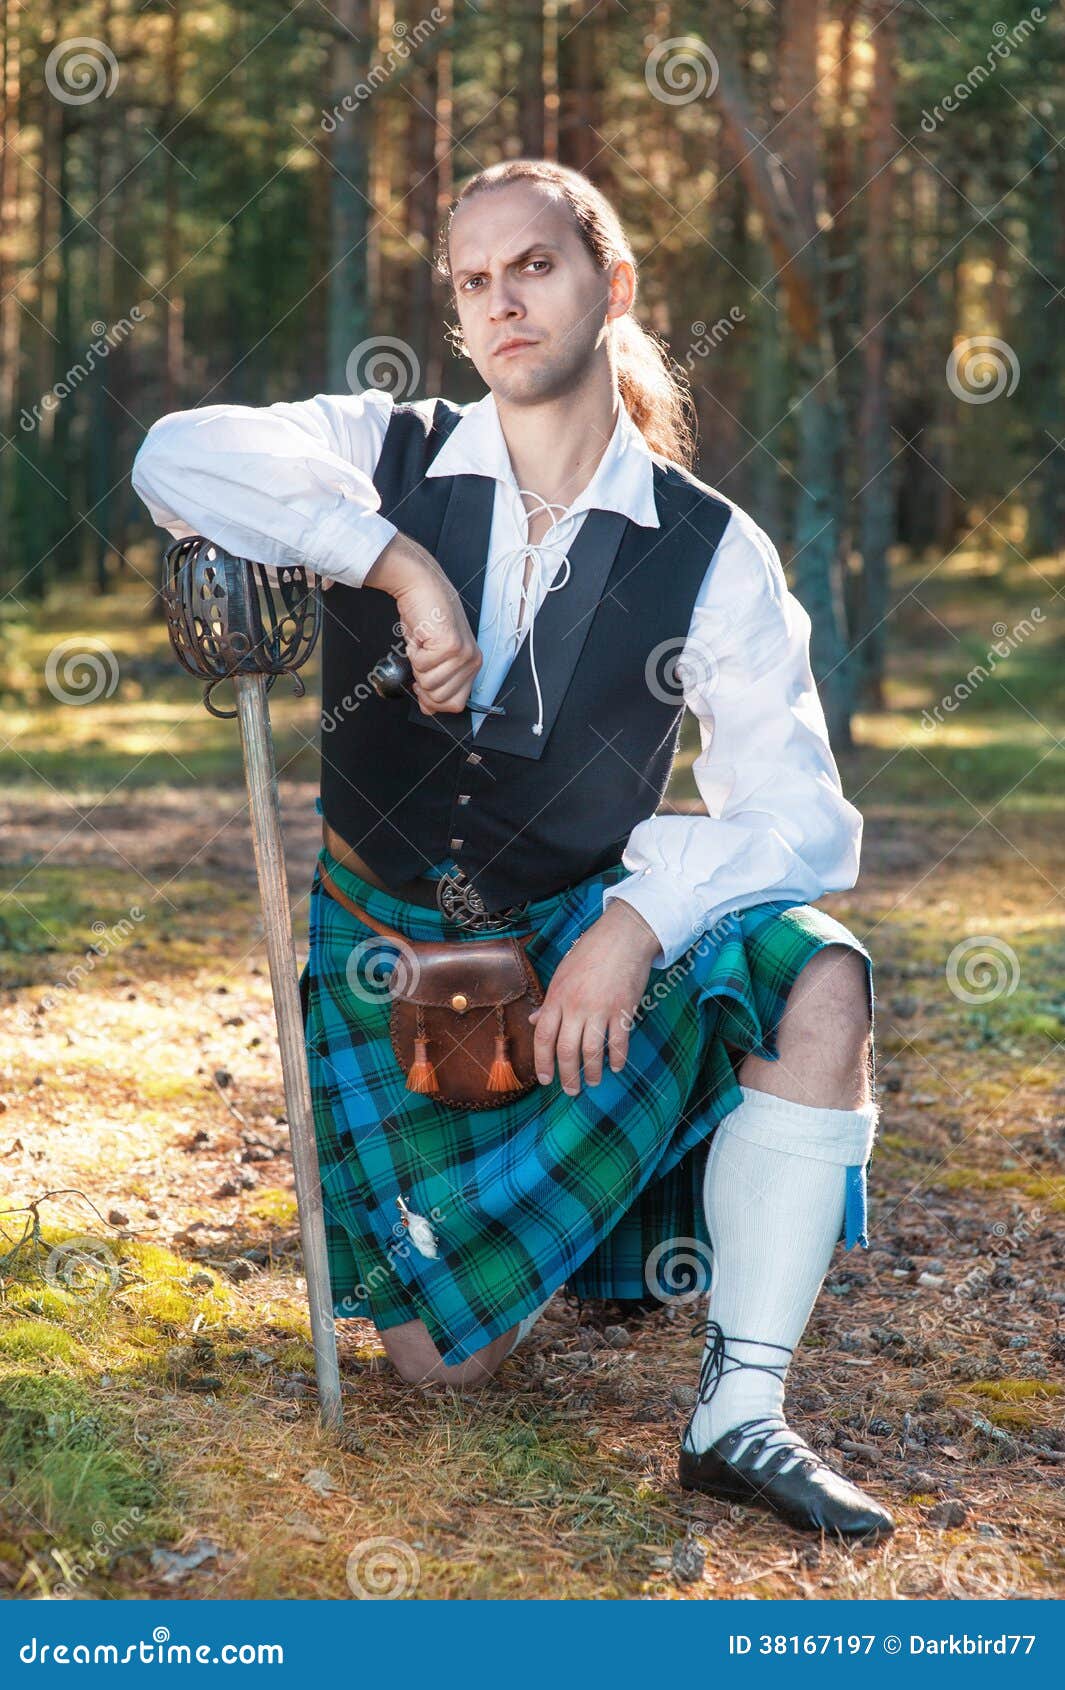 I want to find a scottish man